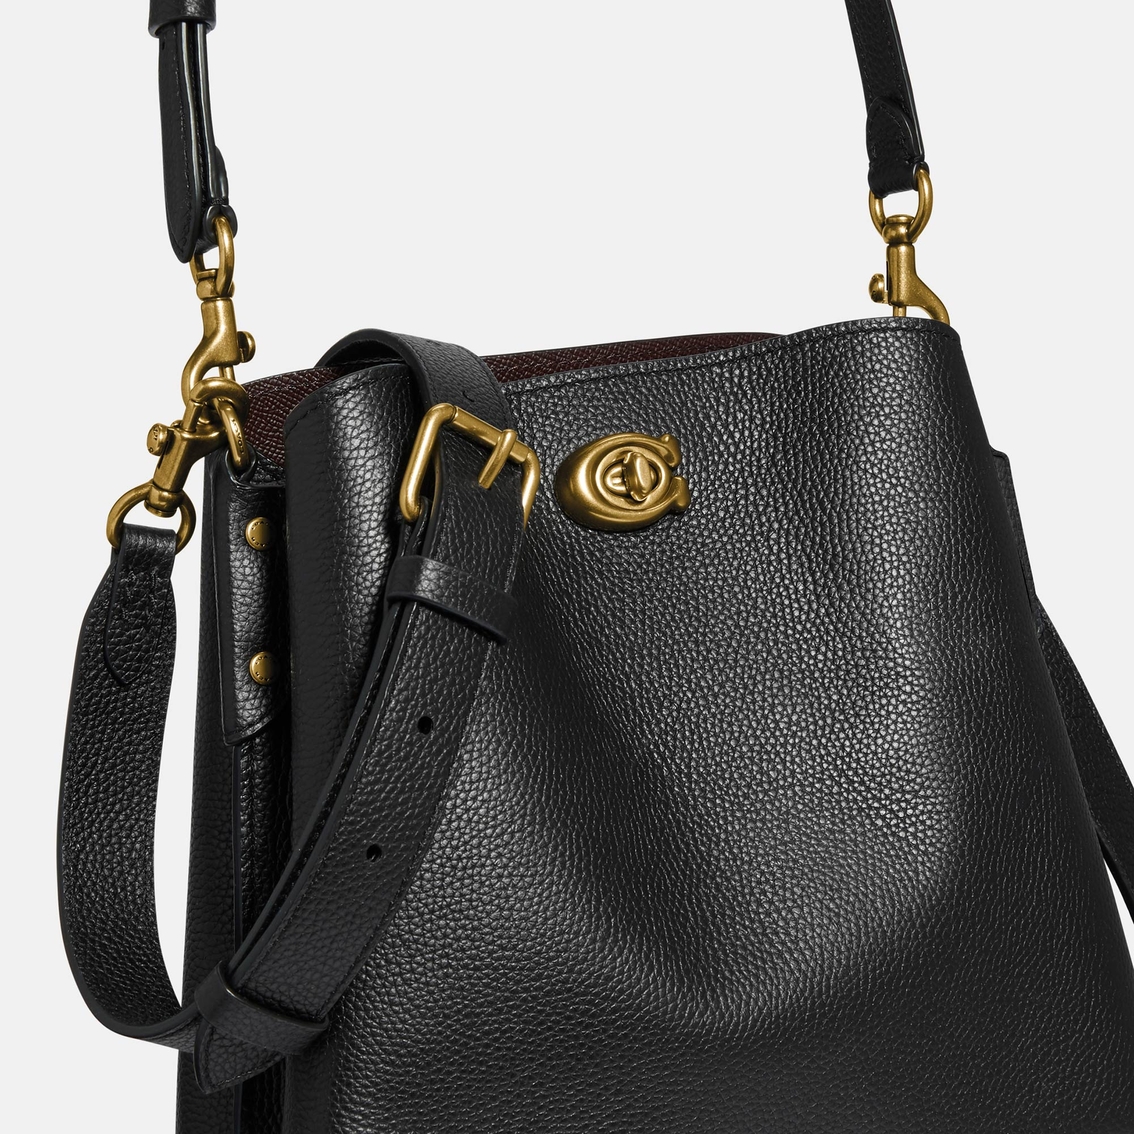 COACH Willow Bucket Bag - Image 5 of 7